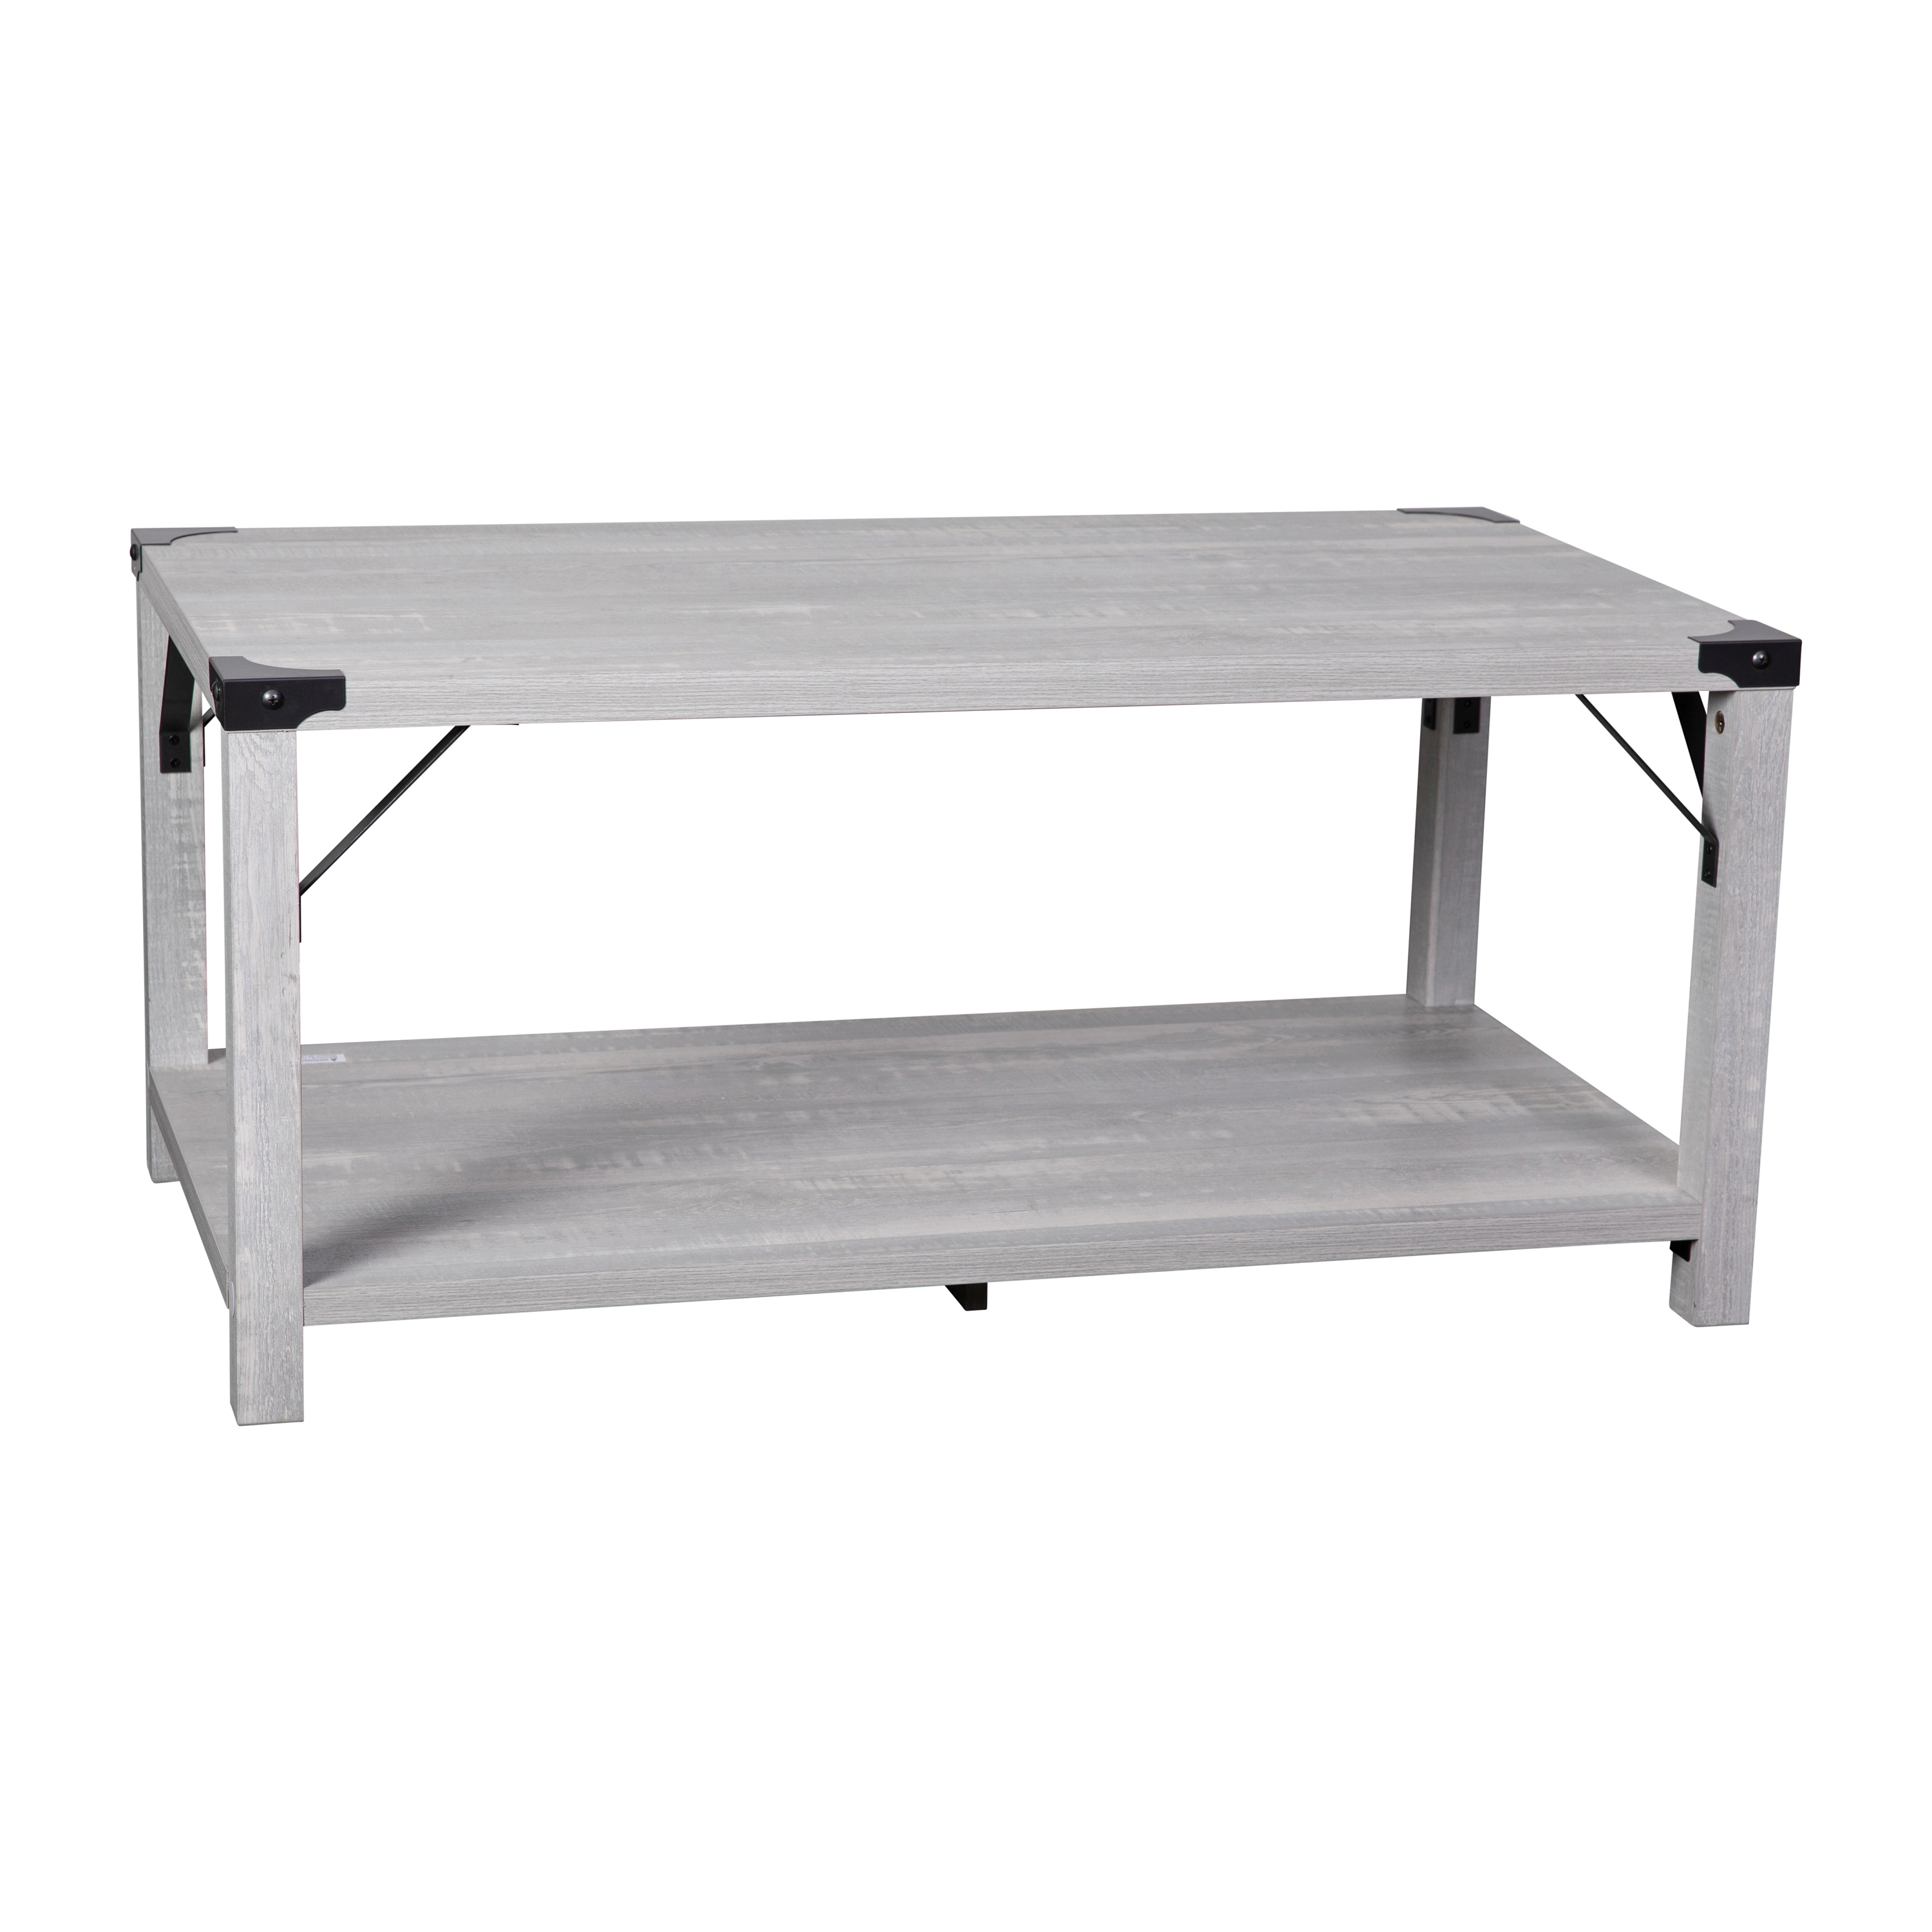 Flash Furniture ZG-037-LTGY-GG Farmhouse Wooden 2 Tier Aspen Gray Coffee Table with Black Accents and Cross Bracing